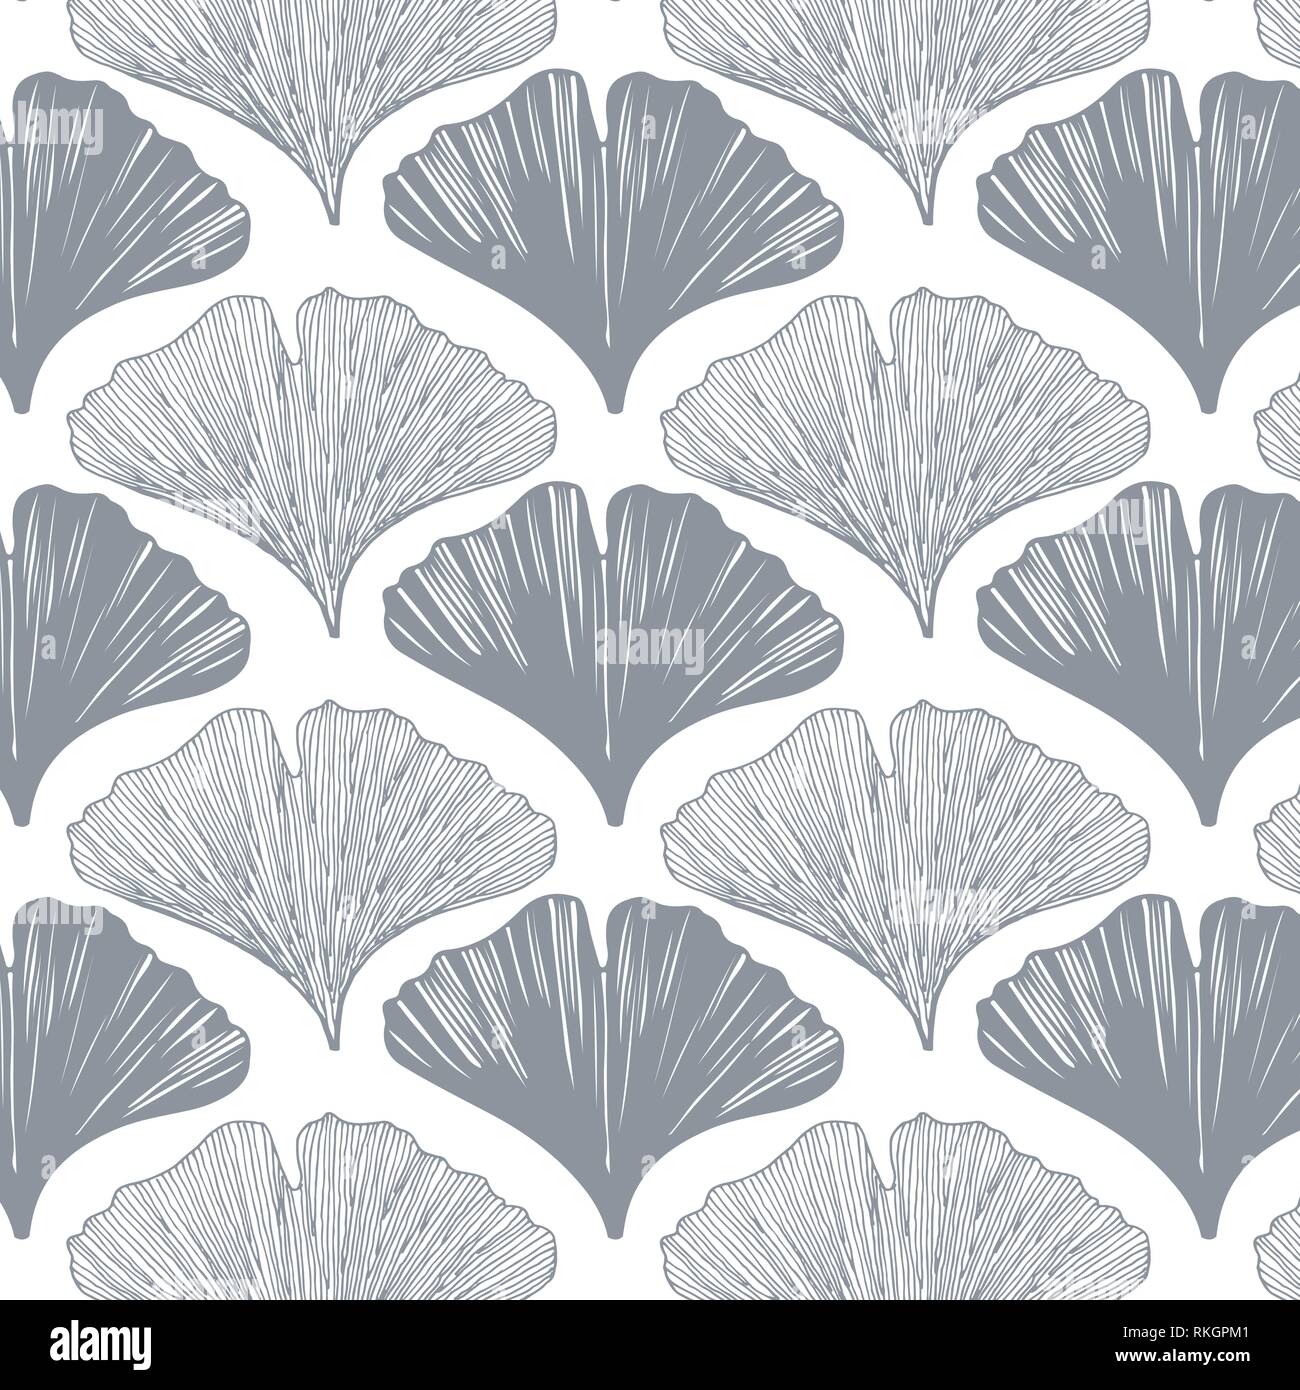 Hand drawn ginkgo leaves vector pattern in gray colors palette on a white background Stock Vector